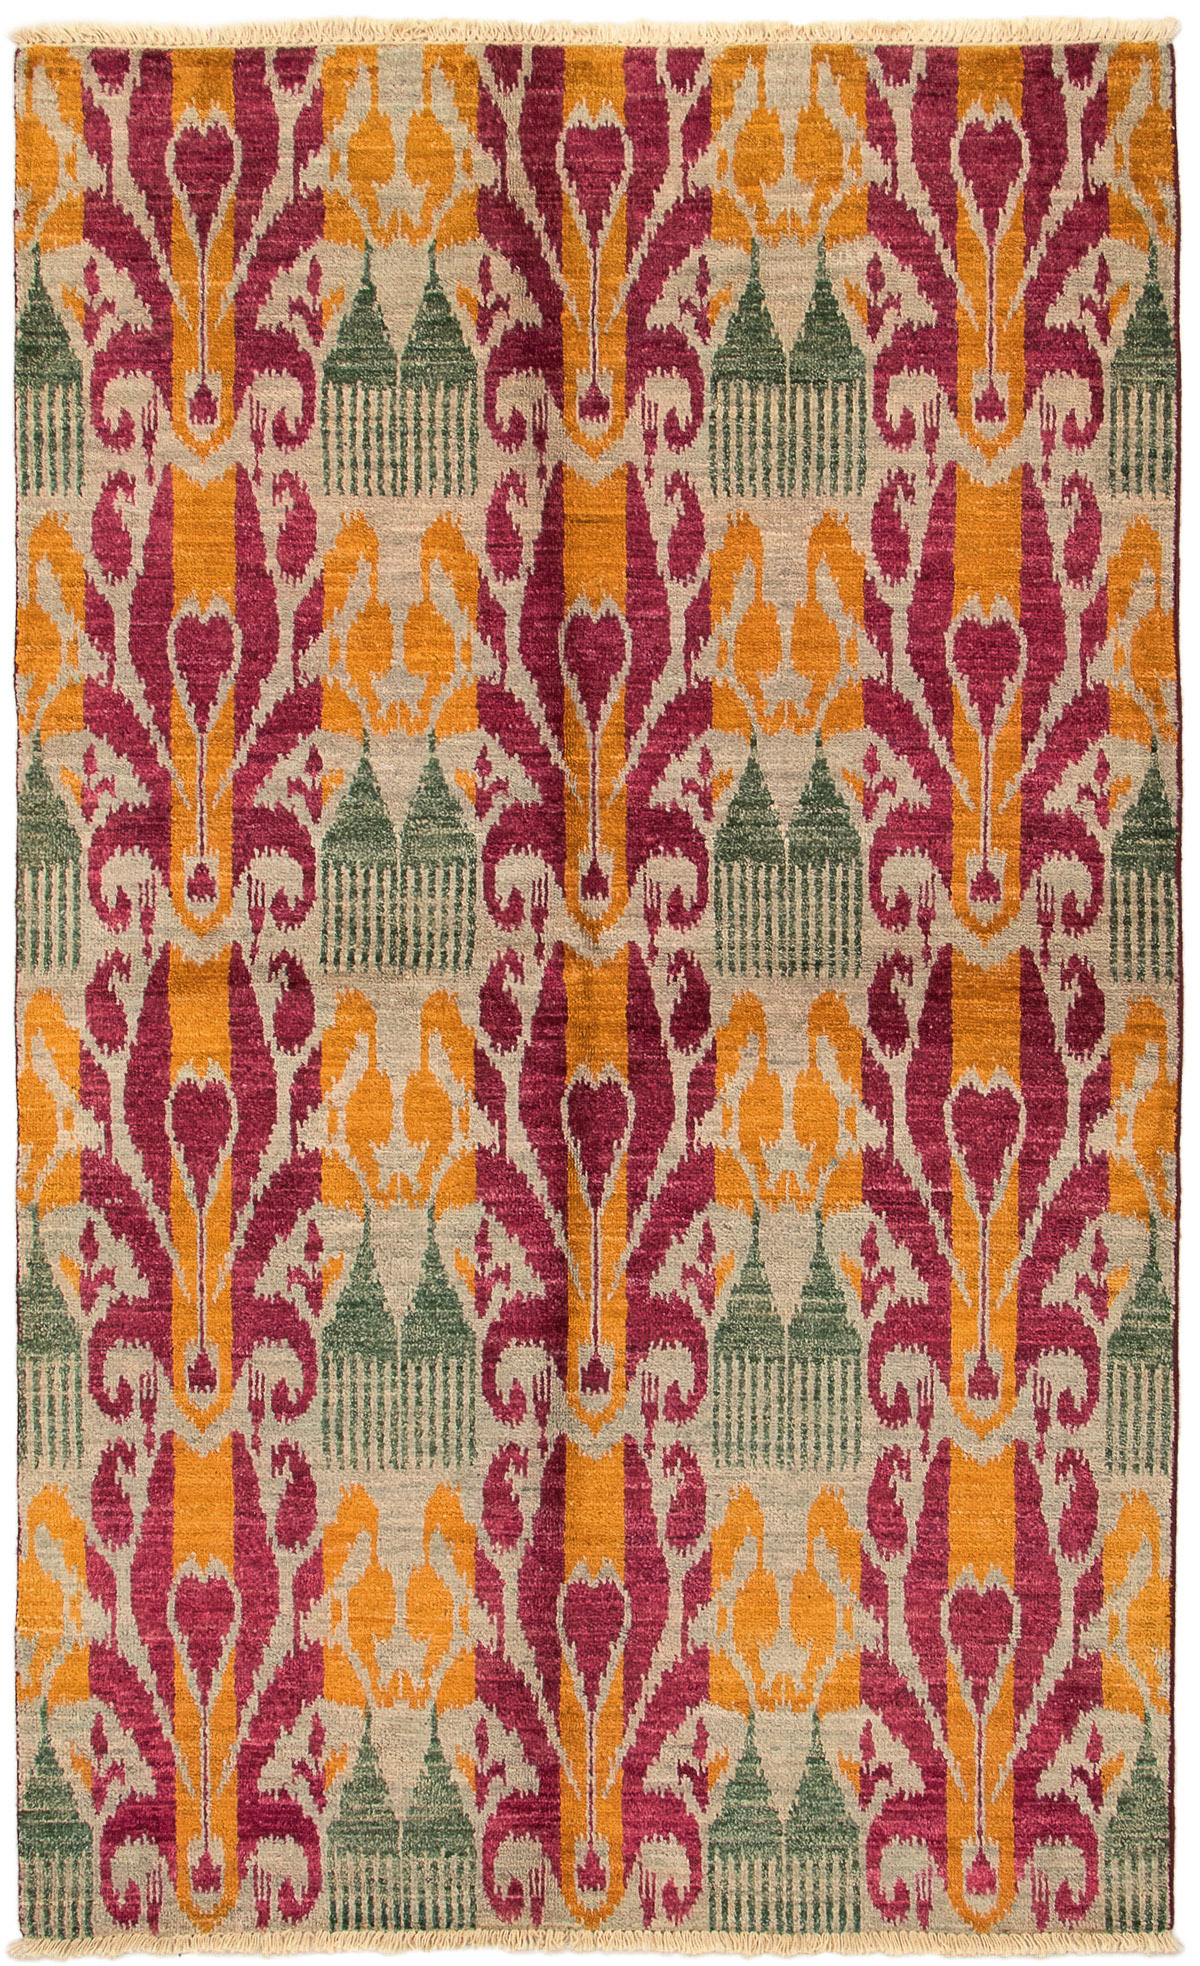 Hand-knotted Shalimar Burgundy, Light Grey Wool Rug 4'10" x 8'1" Size: 4'10" x 8'1"  